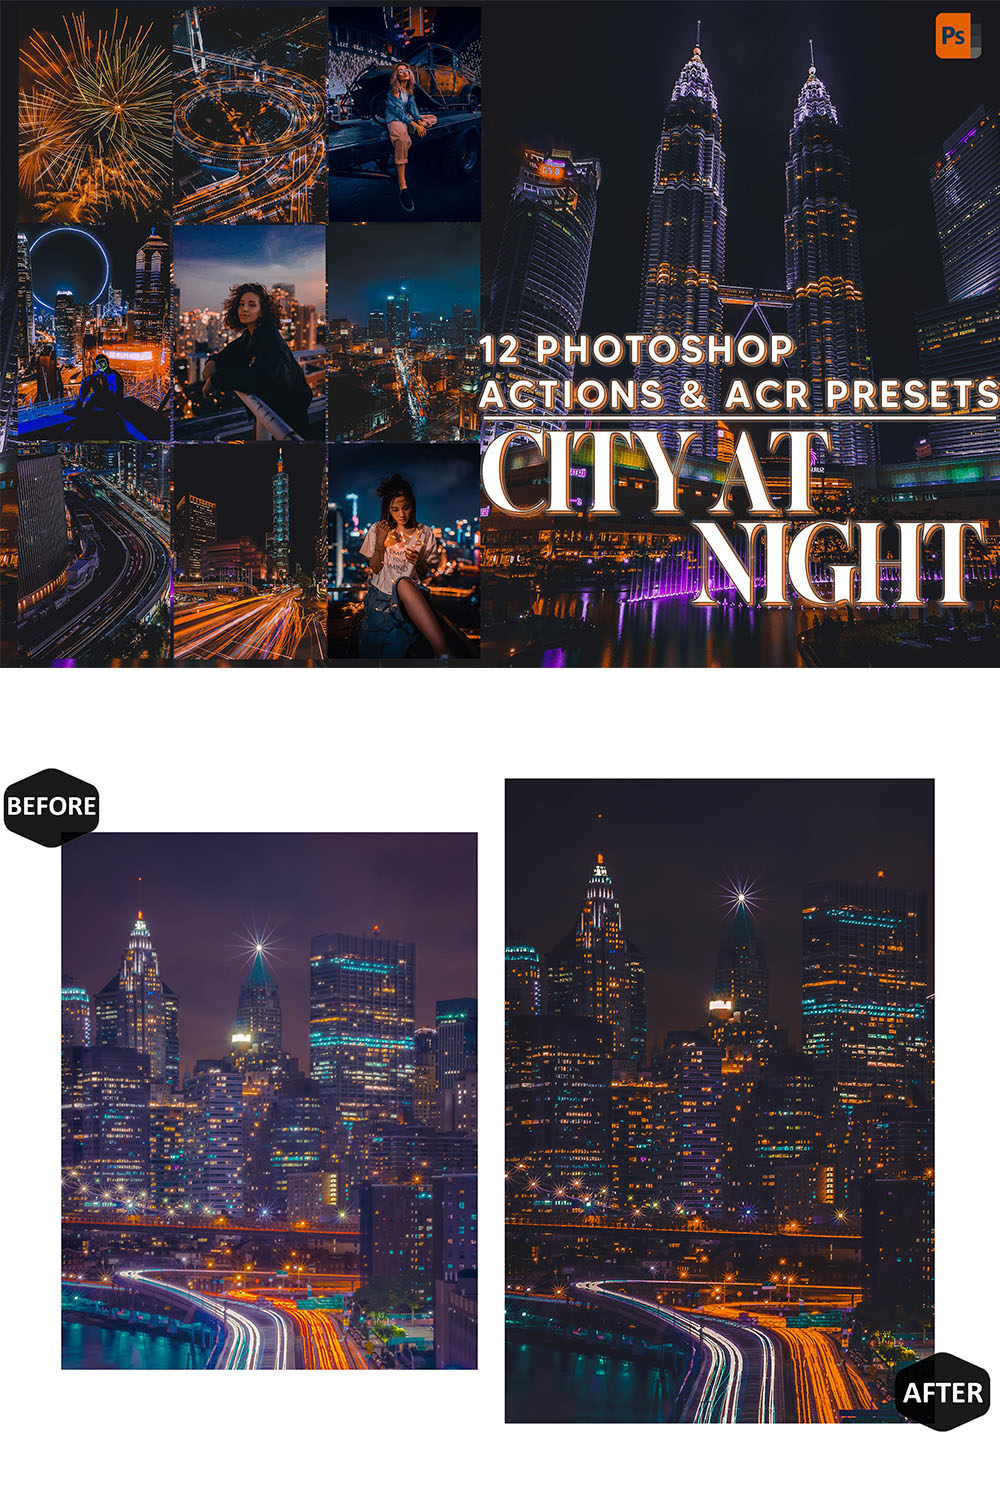 12 Photoshop Actions, City At Night Ps Action, Moody Urban ACR Preset, Orange Street Ps Filter, Atn Portrait And Lifestyle Theme For Instagram, Blogger pinterest preview image.